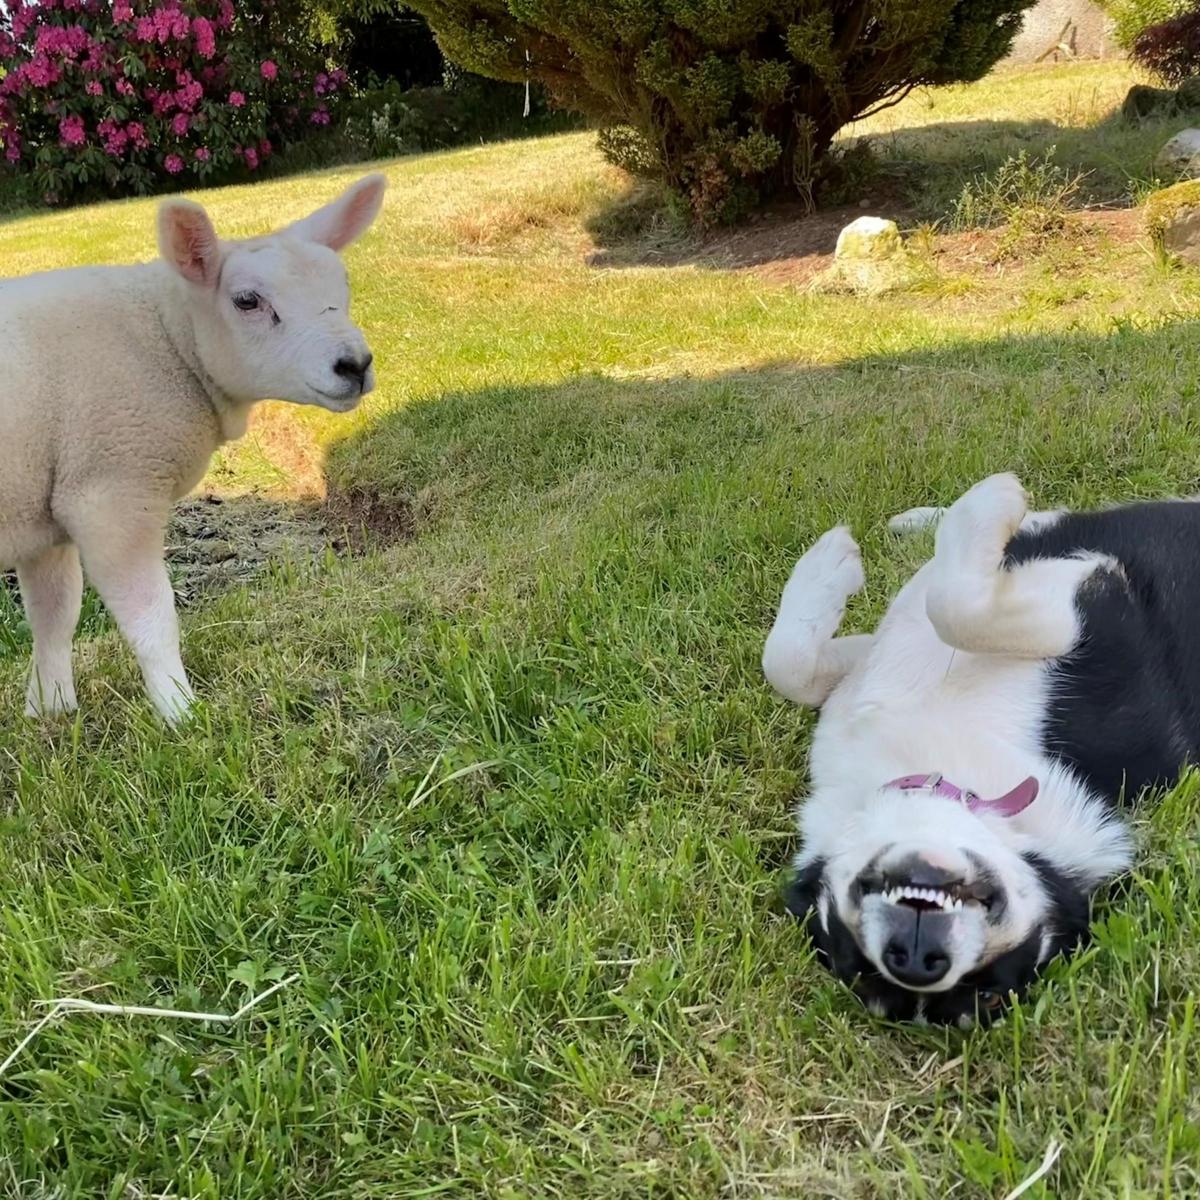 Mandy Rimmer (Braco) - Here’s a pic of my pet lamb and our dog who seems to have given up trying to round him up